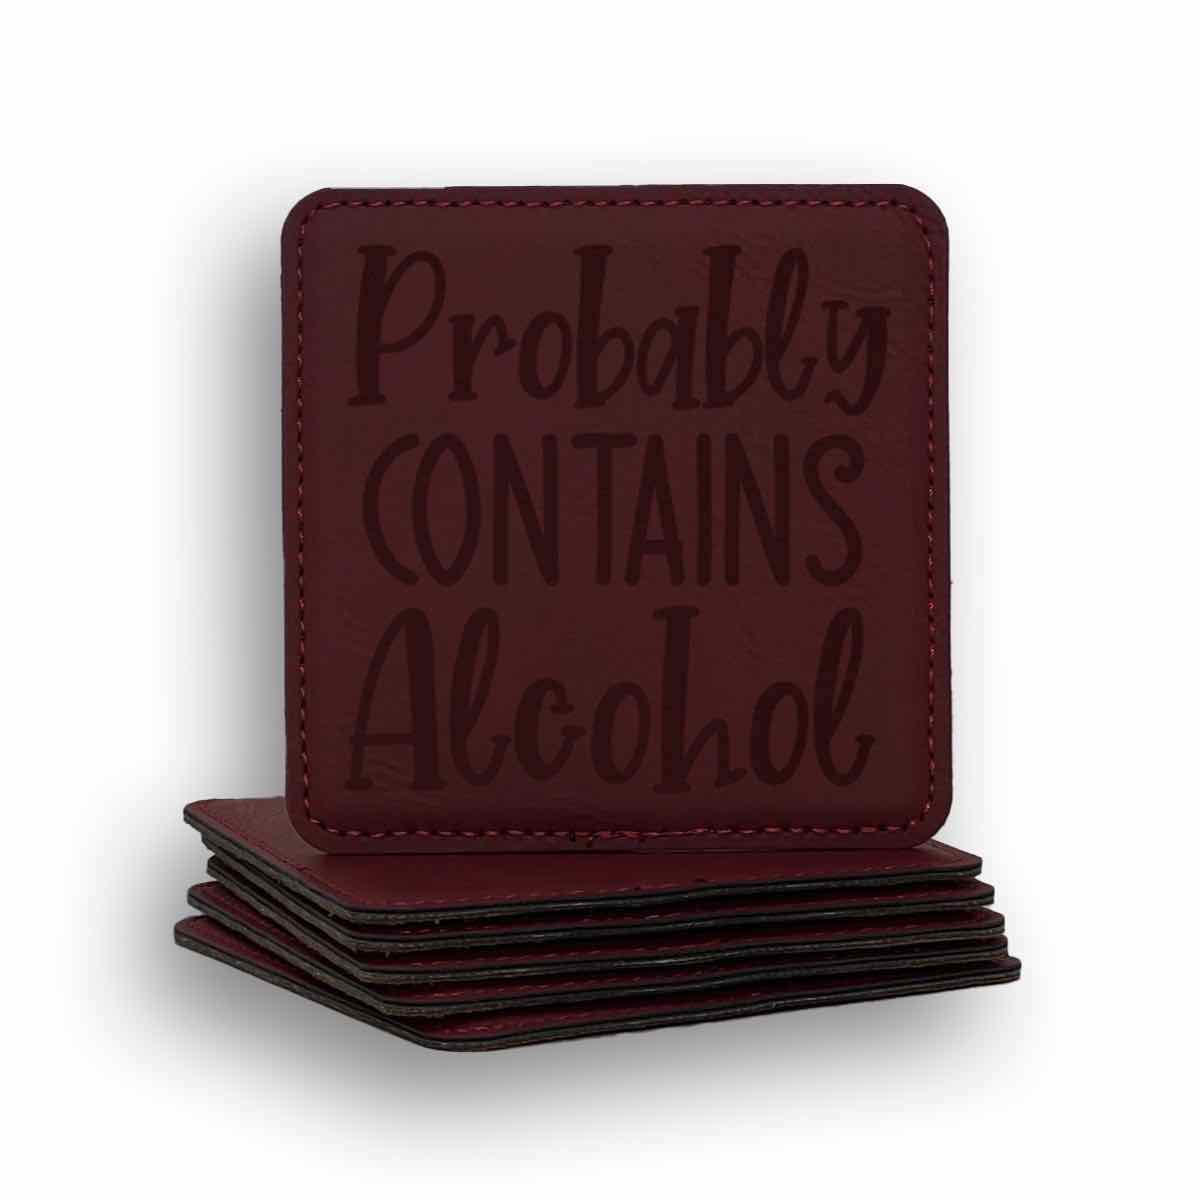 Probably Contains Alcohol Coaster